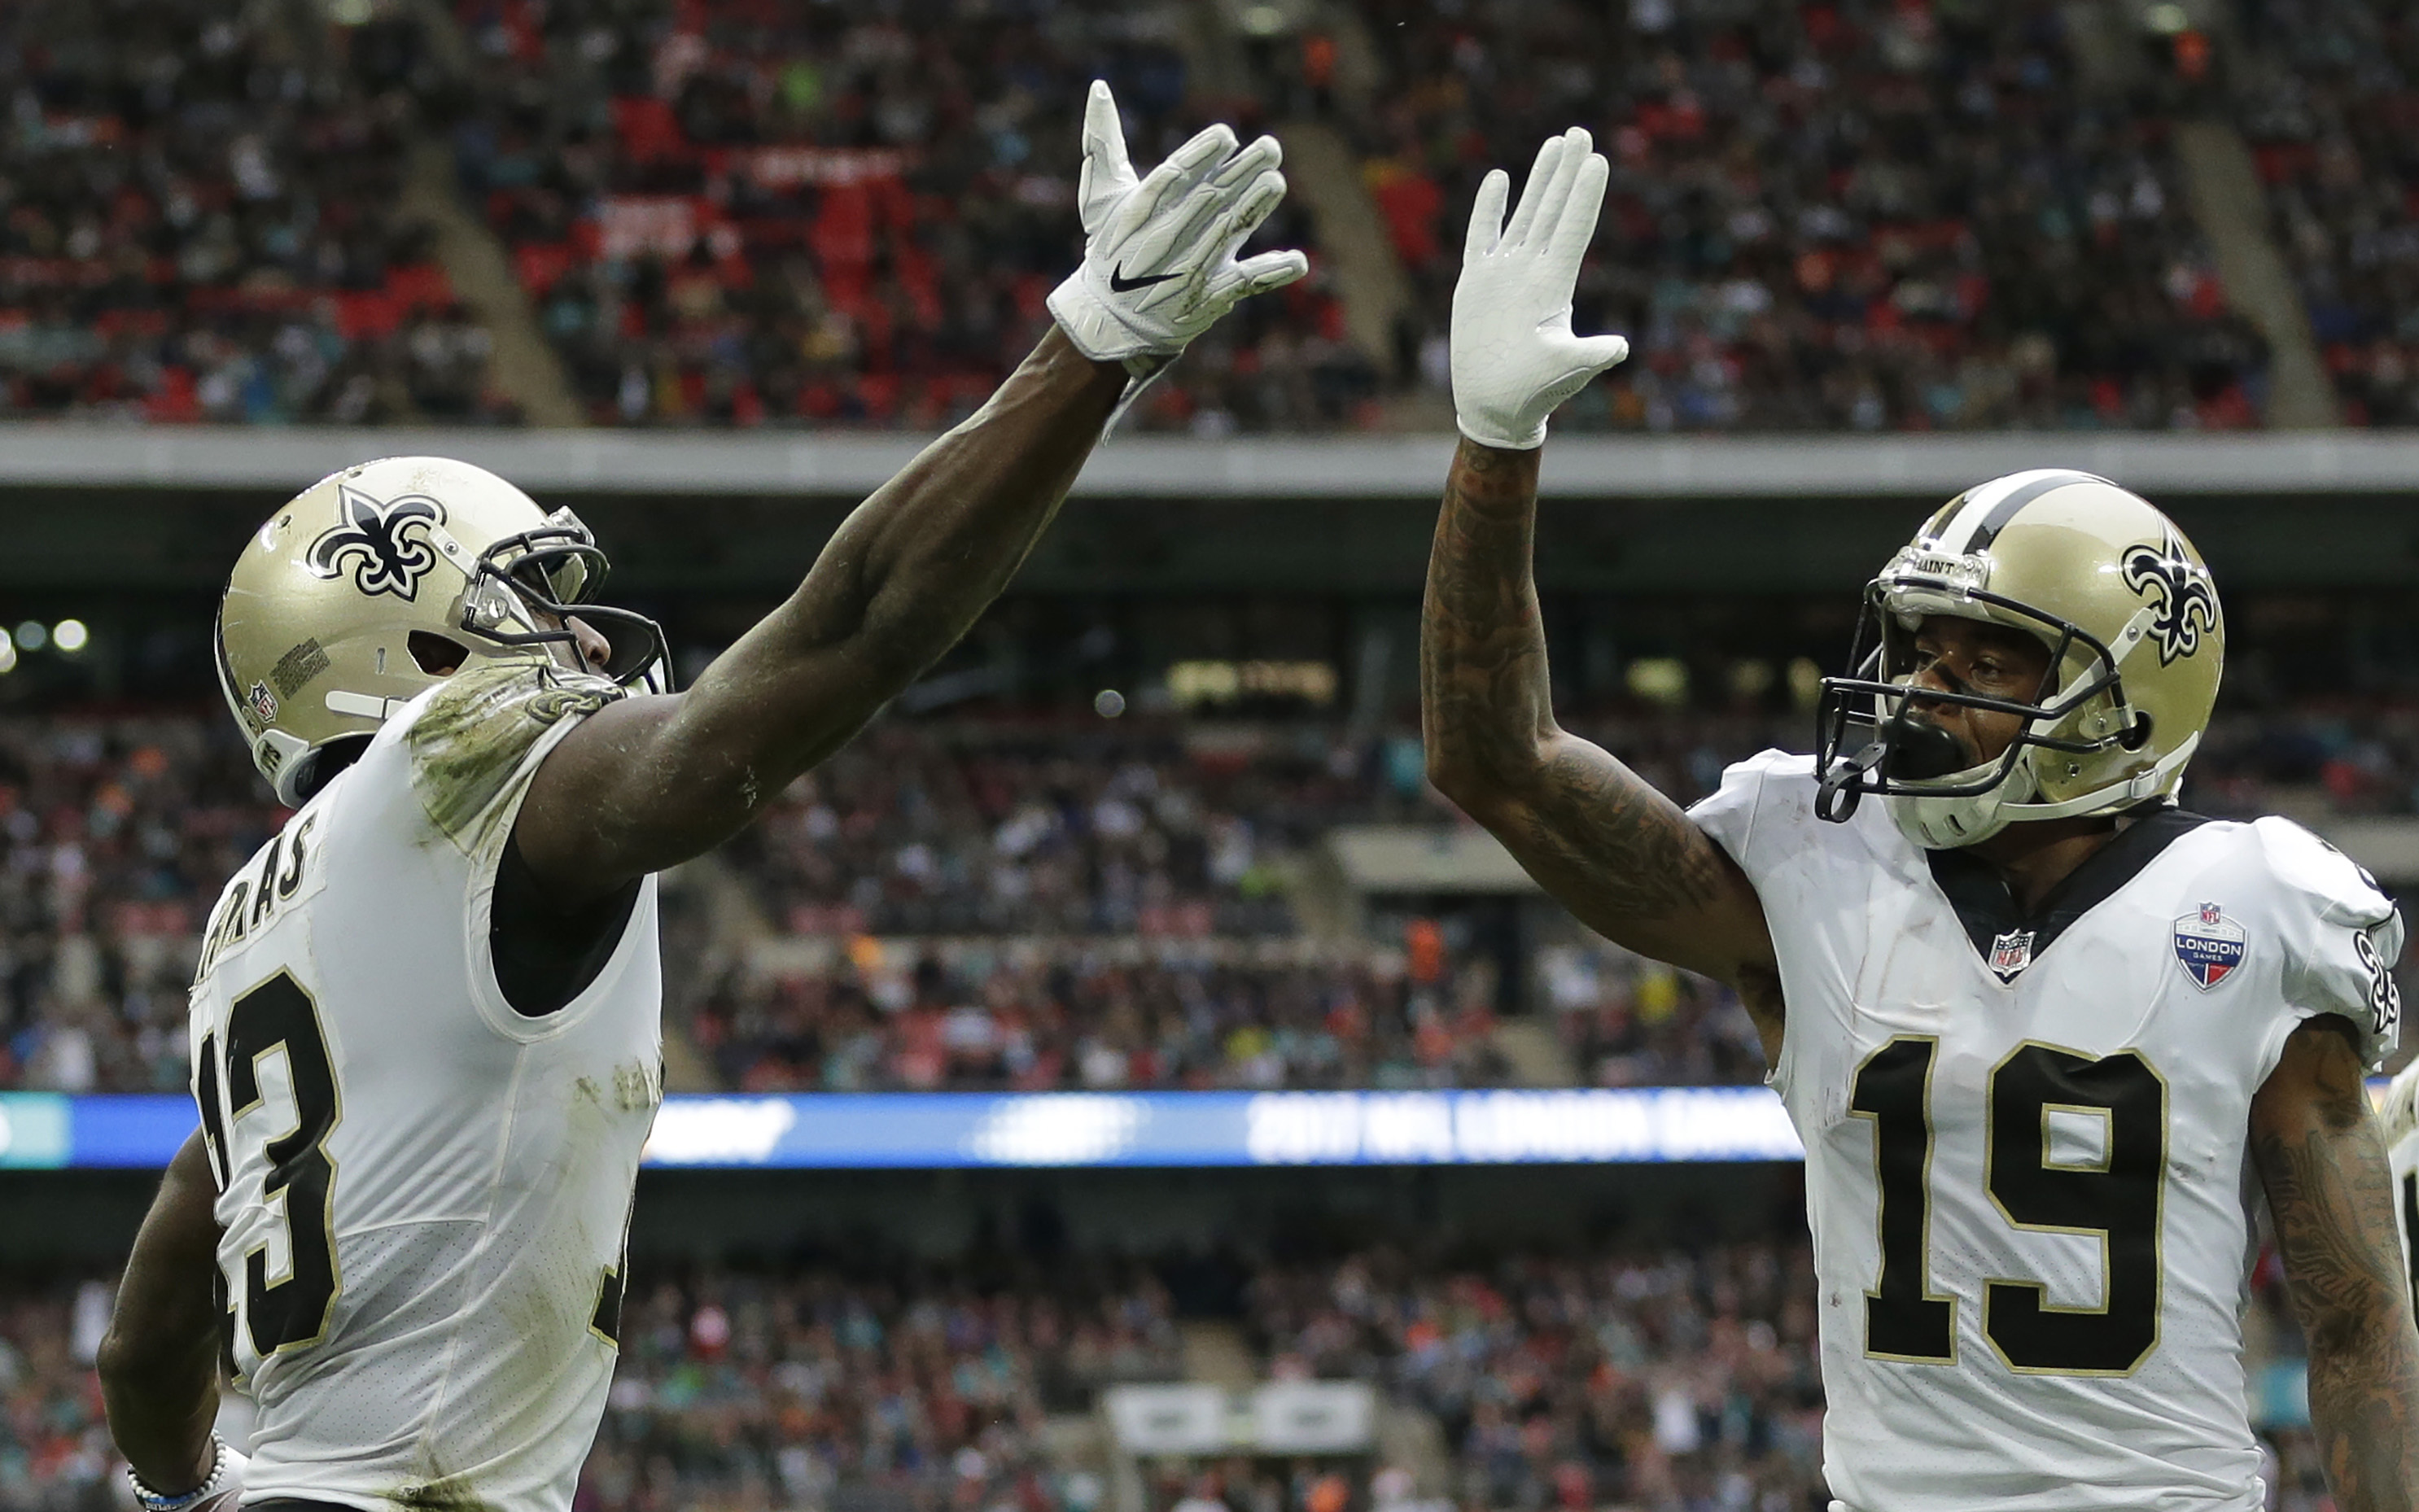 New Orleans Saints played at Wembley Stadium last year (Henry Browne/Getty Images)